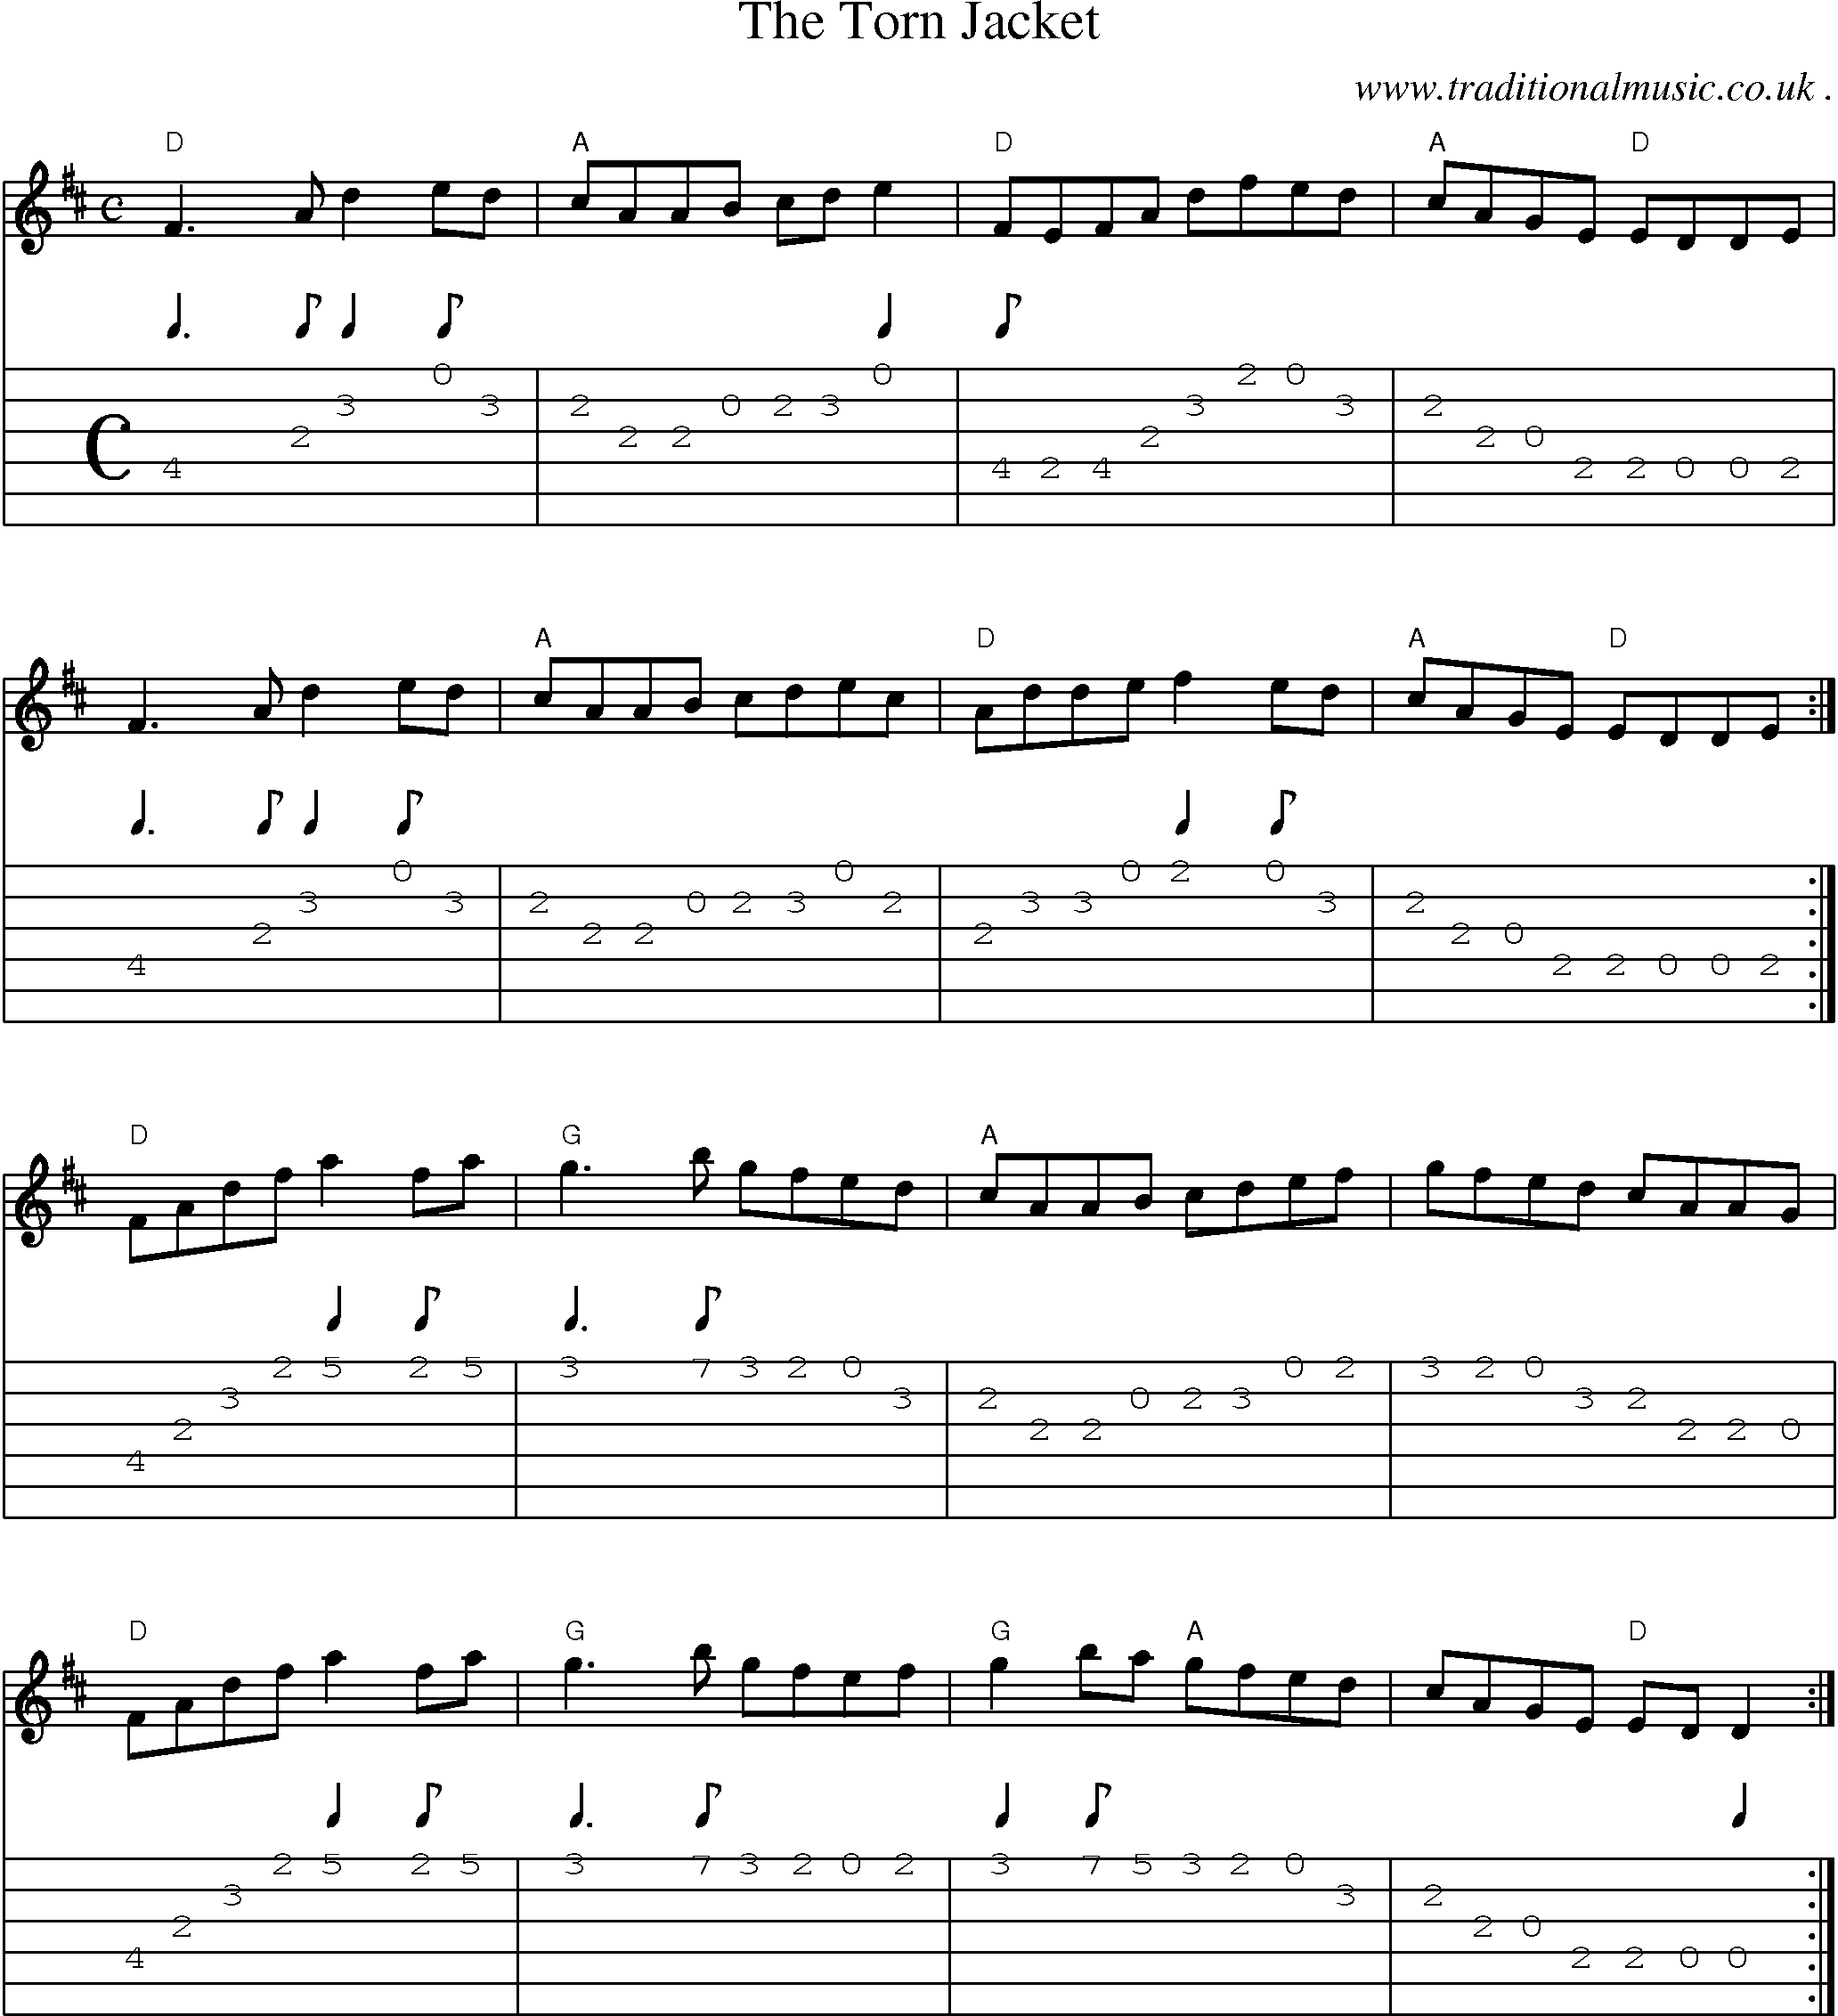 Music Score and Guitar Tabs for The Torn Jacket